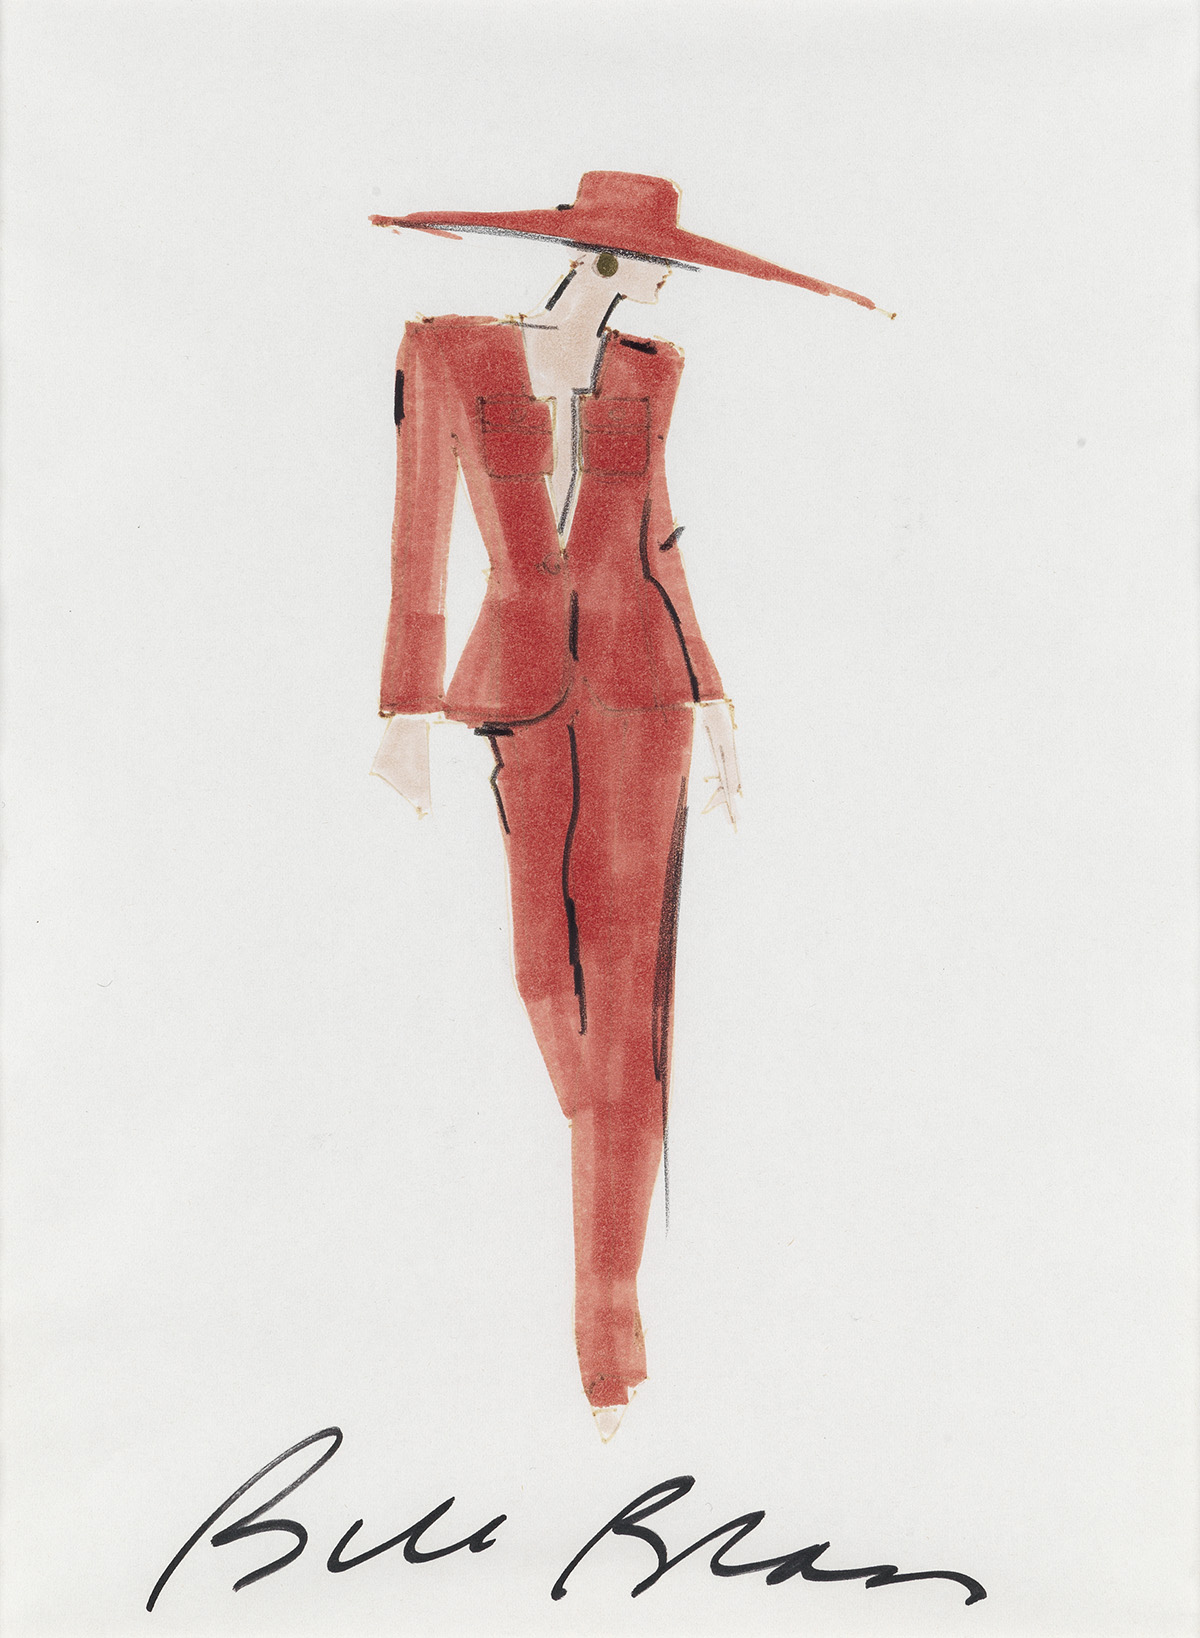 BILL BLASS. Power Suits and Shoulder Pads.